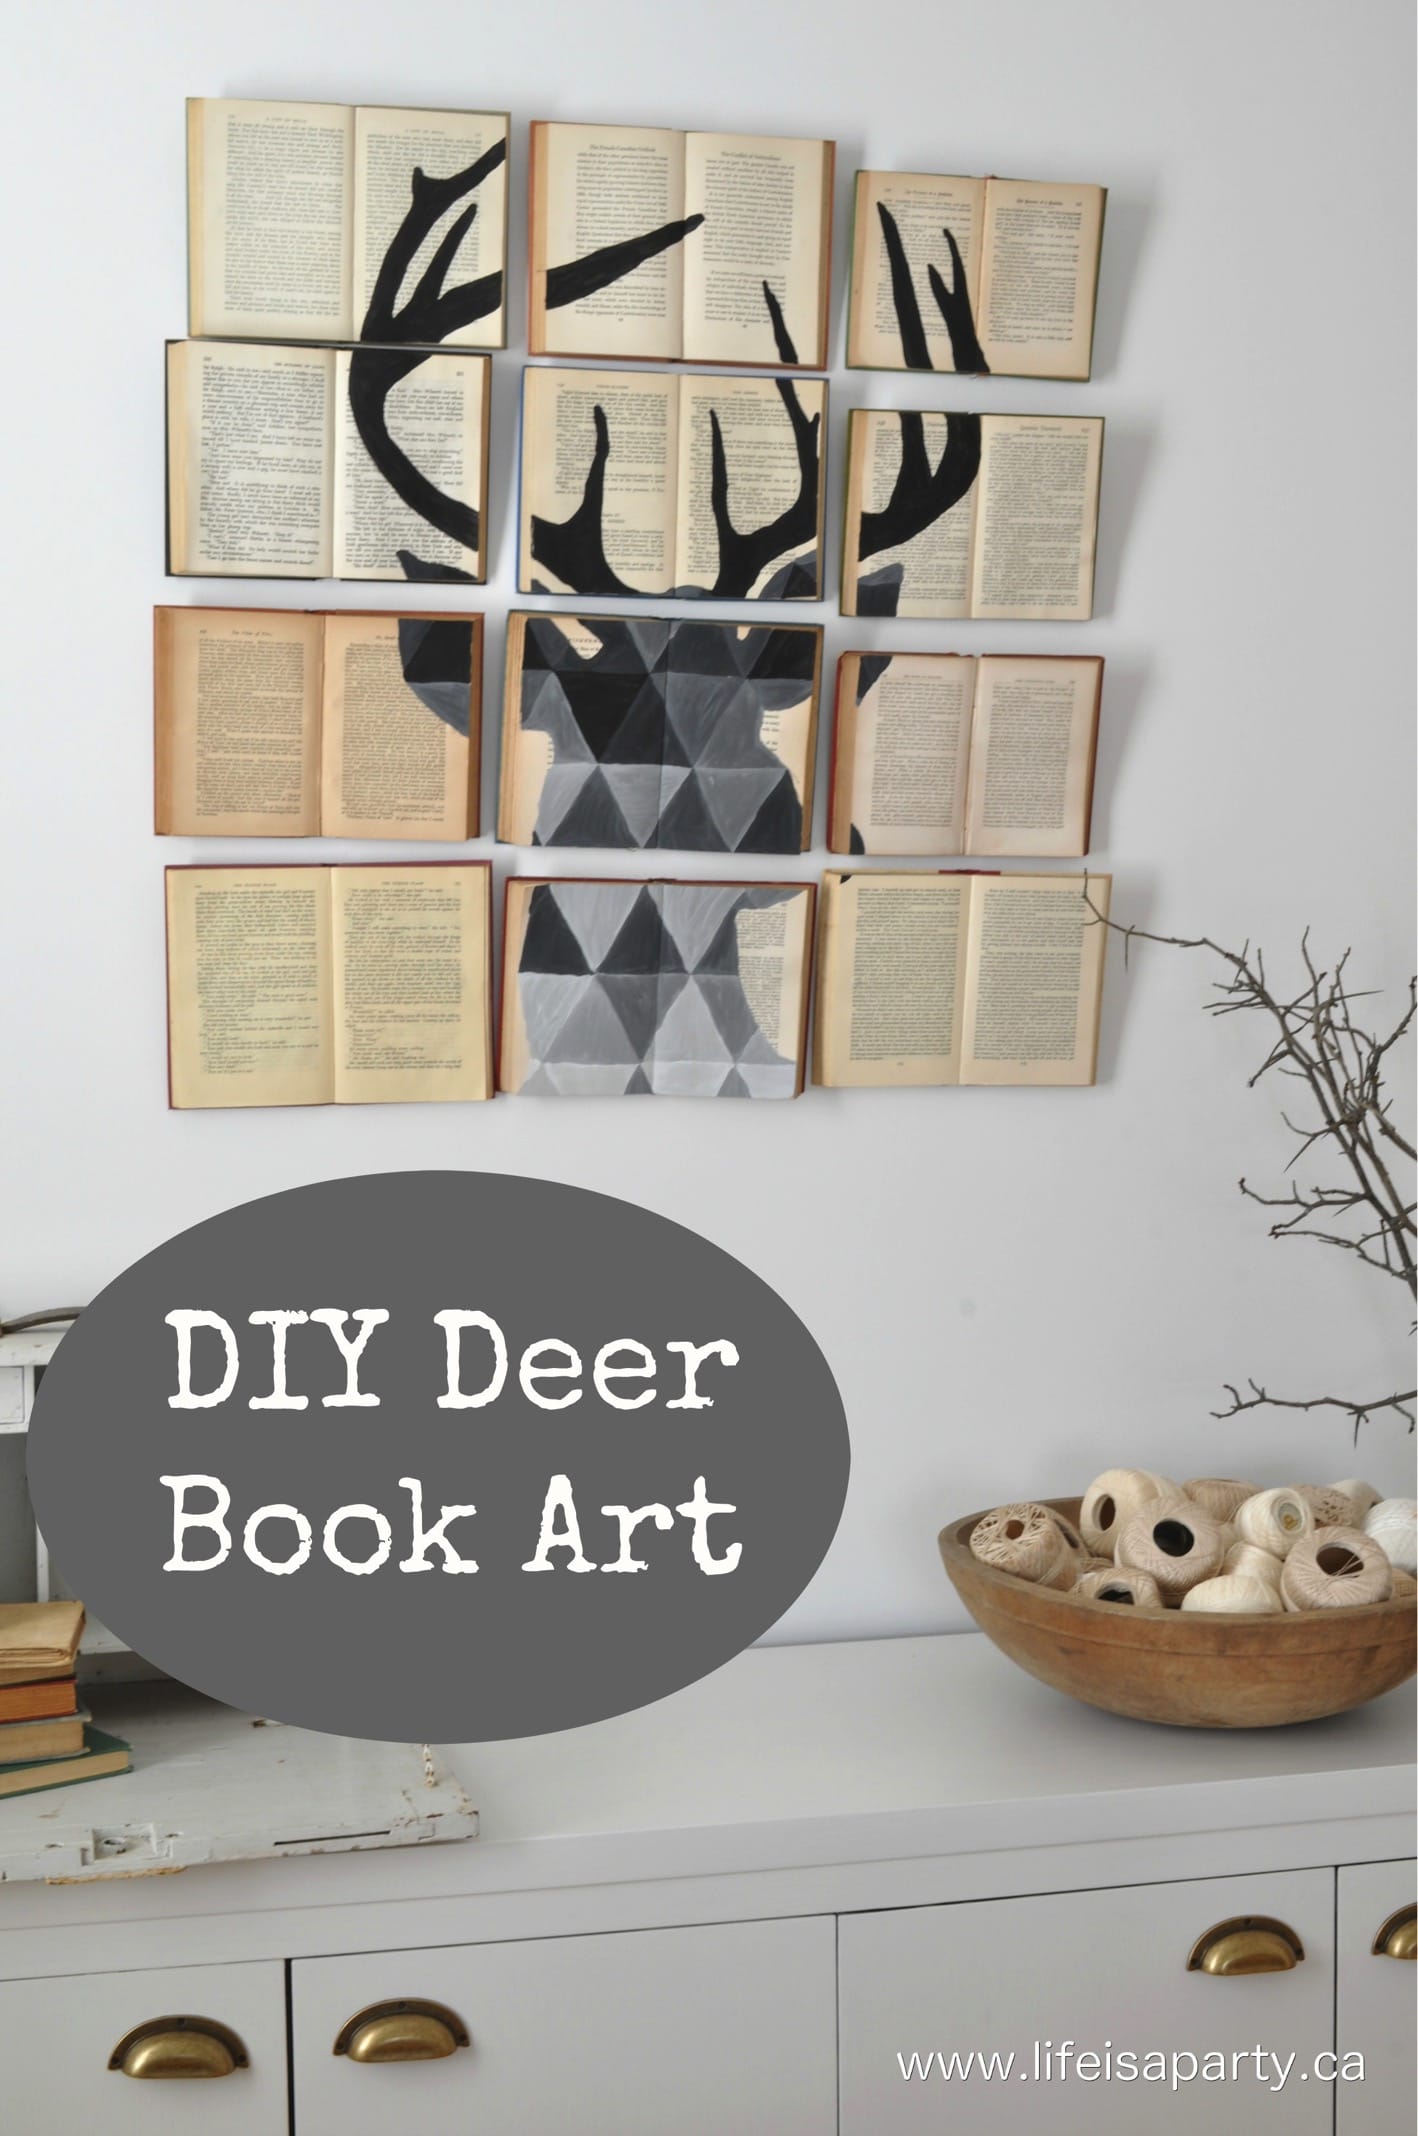 DIY Large Wall Art: Deer Book Art made with old old books as the canvas. Easy, no painting skill required just transfer the pattern and fill in with paint.